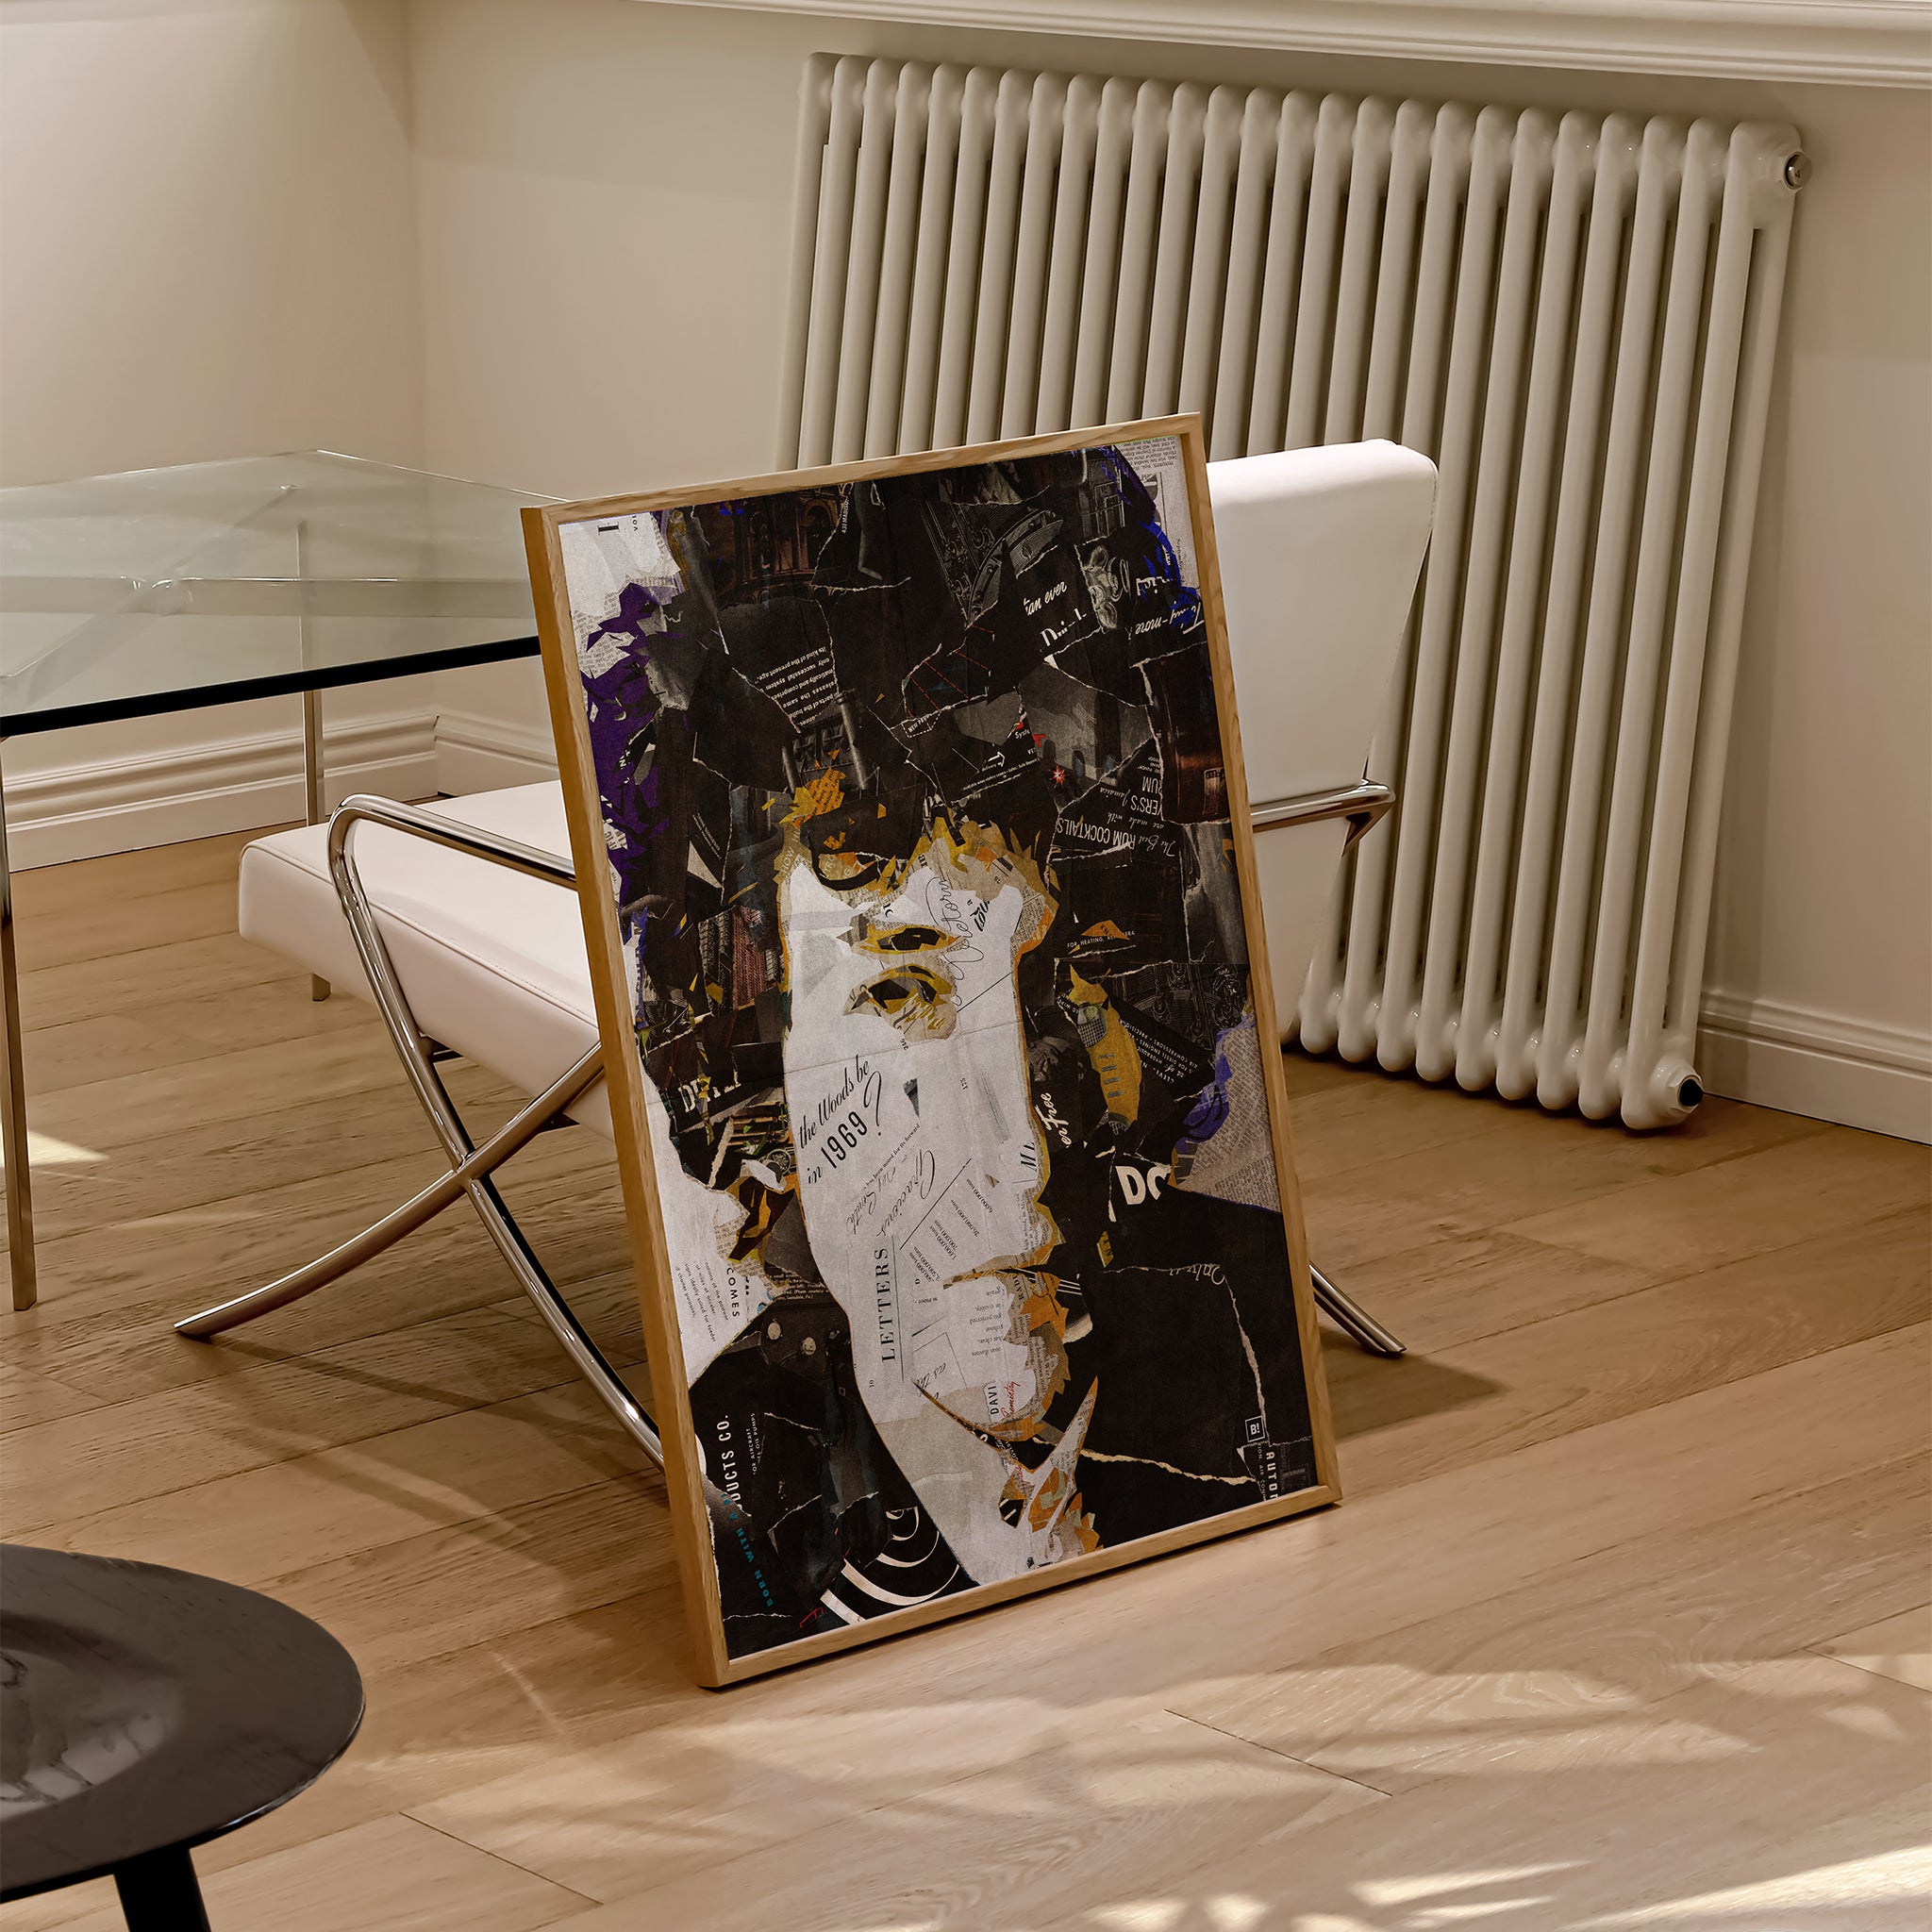 Be inspired by our iconic collage portrait art print of Bob Dylan. This artwork was printed using the giclée process on archival acid-free paper and is presented in a natural oak frame, capturing its timeless beauty in every detail.